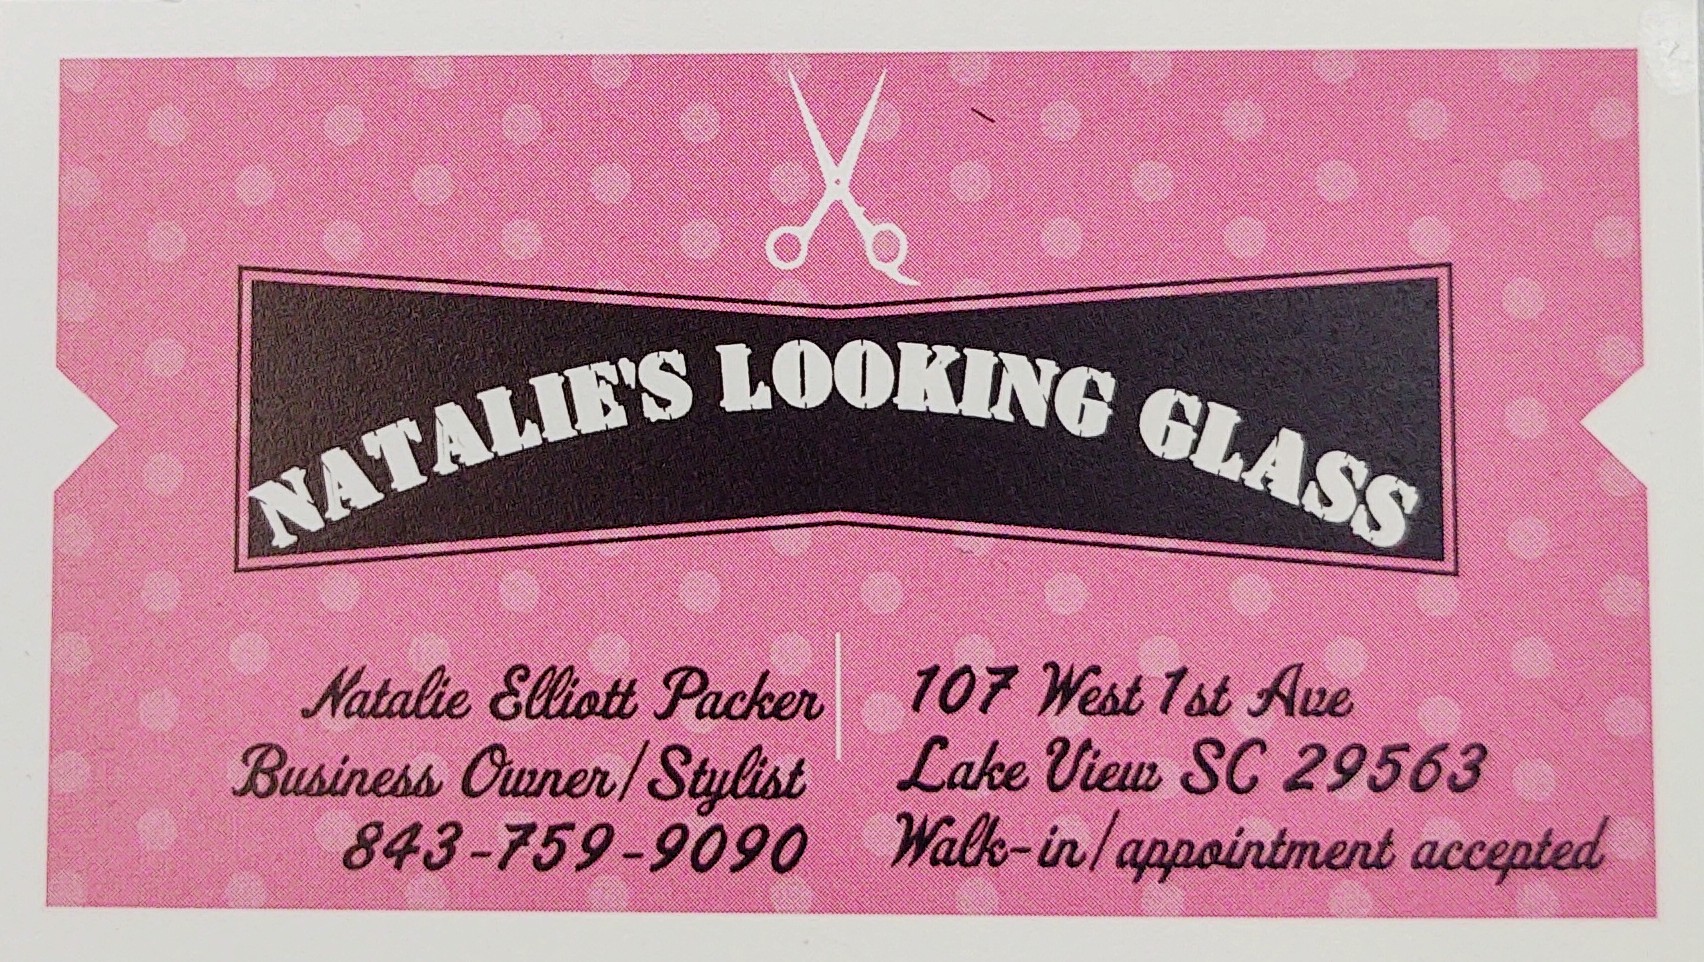 Natalie's Looking Glass 107 W 1st Ave, Lake View South Carolina 29563